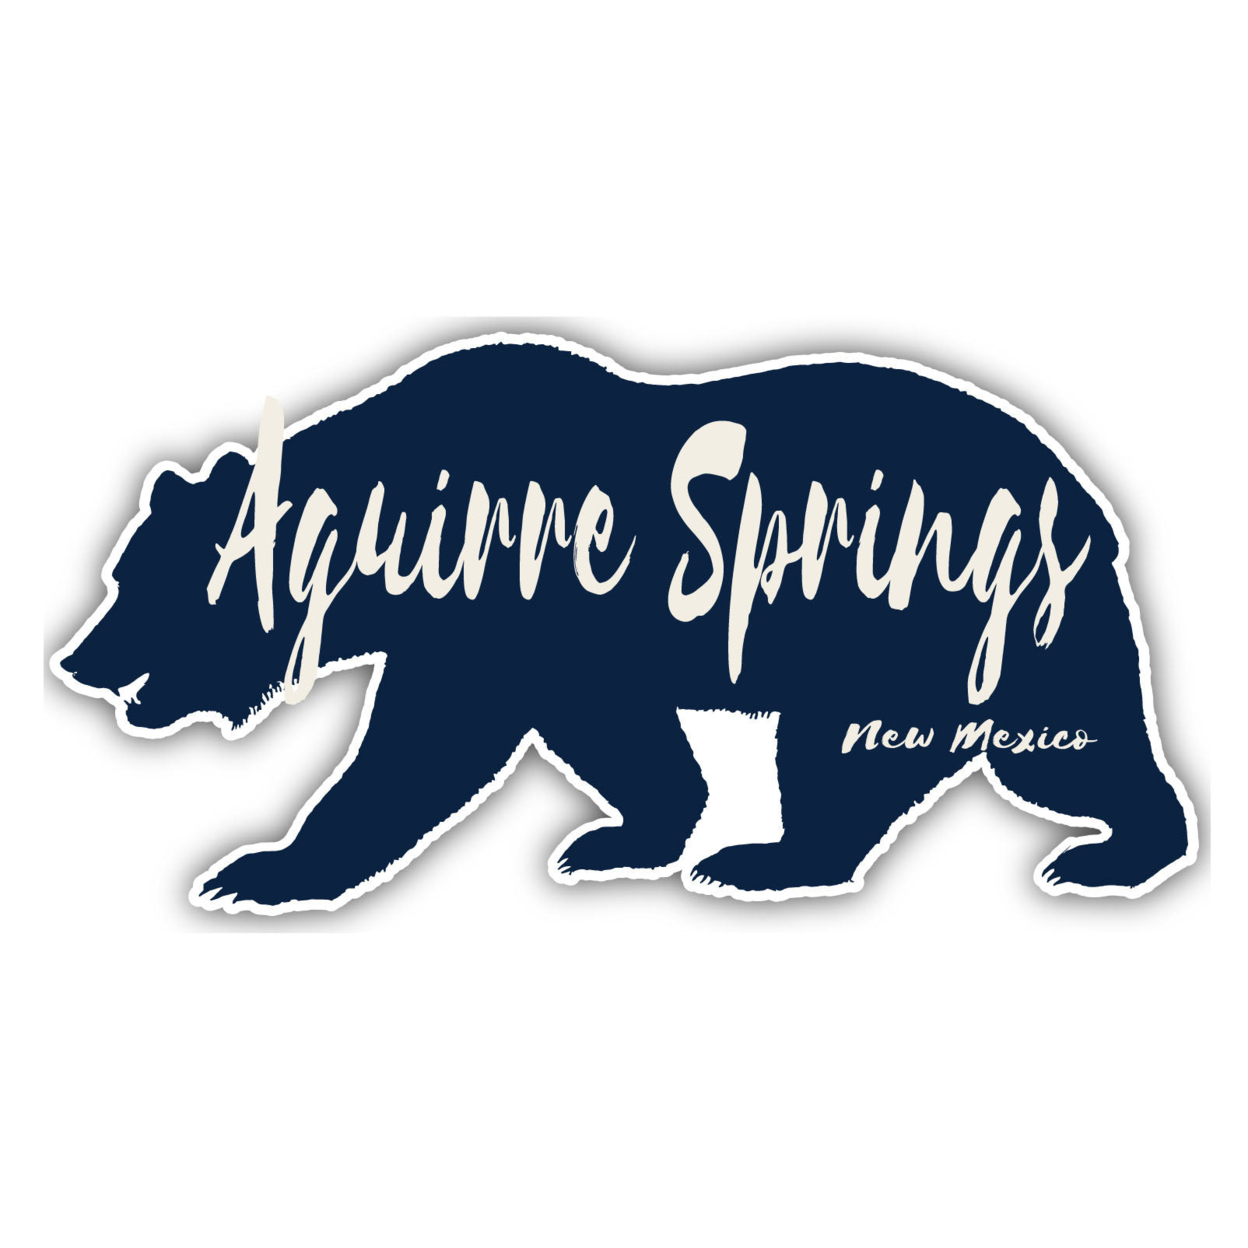 Aguirre Springs New Mexico Souvenir Decorative Stickers (Choose Theme And Size) - 4-Pack, 4-Inch, Bear